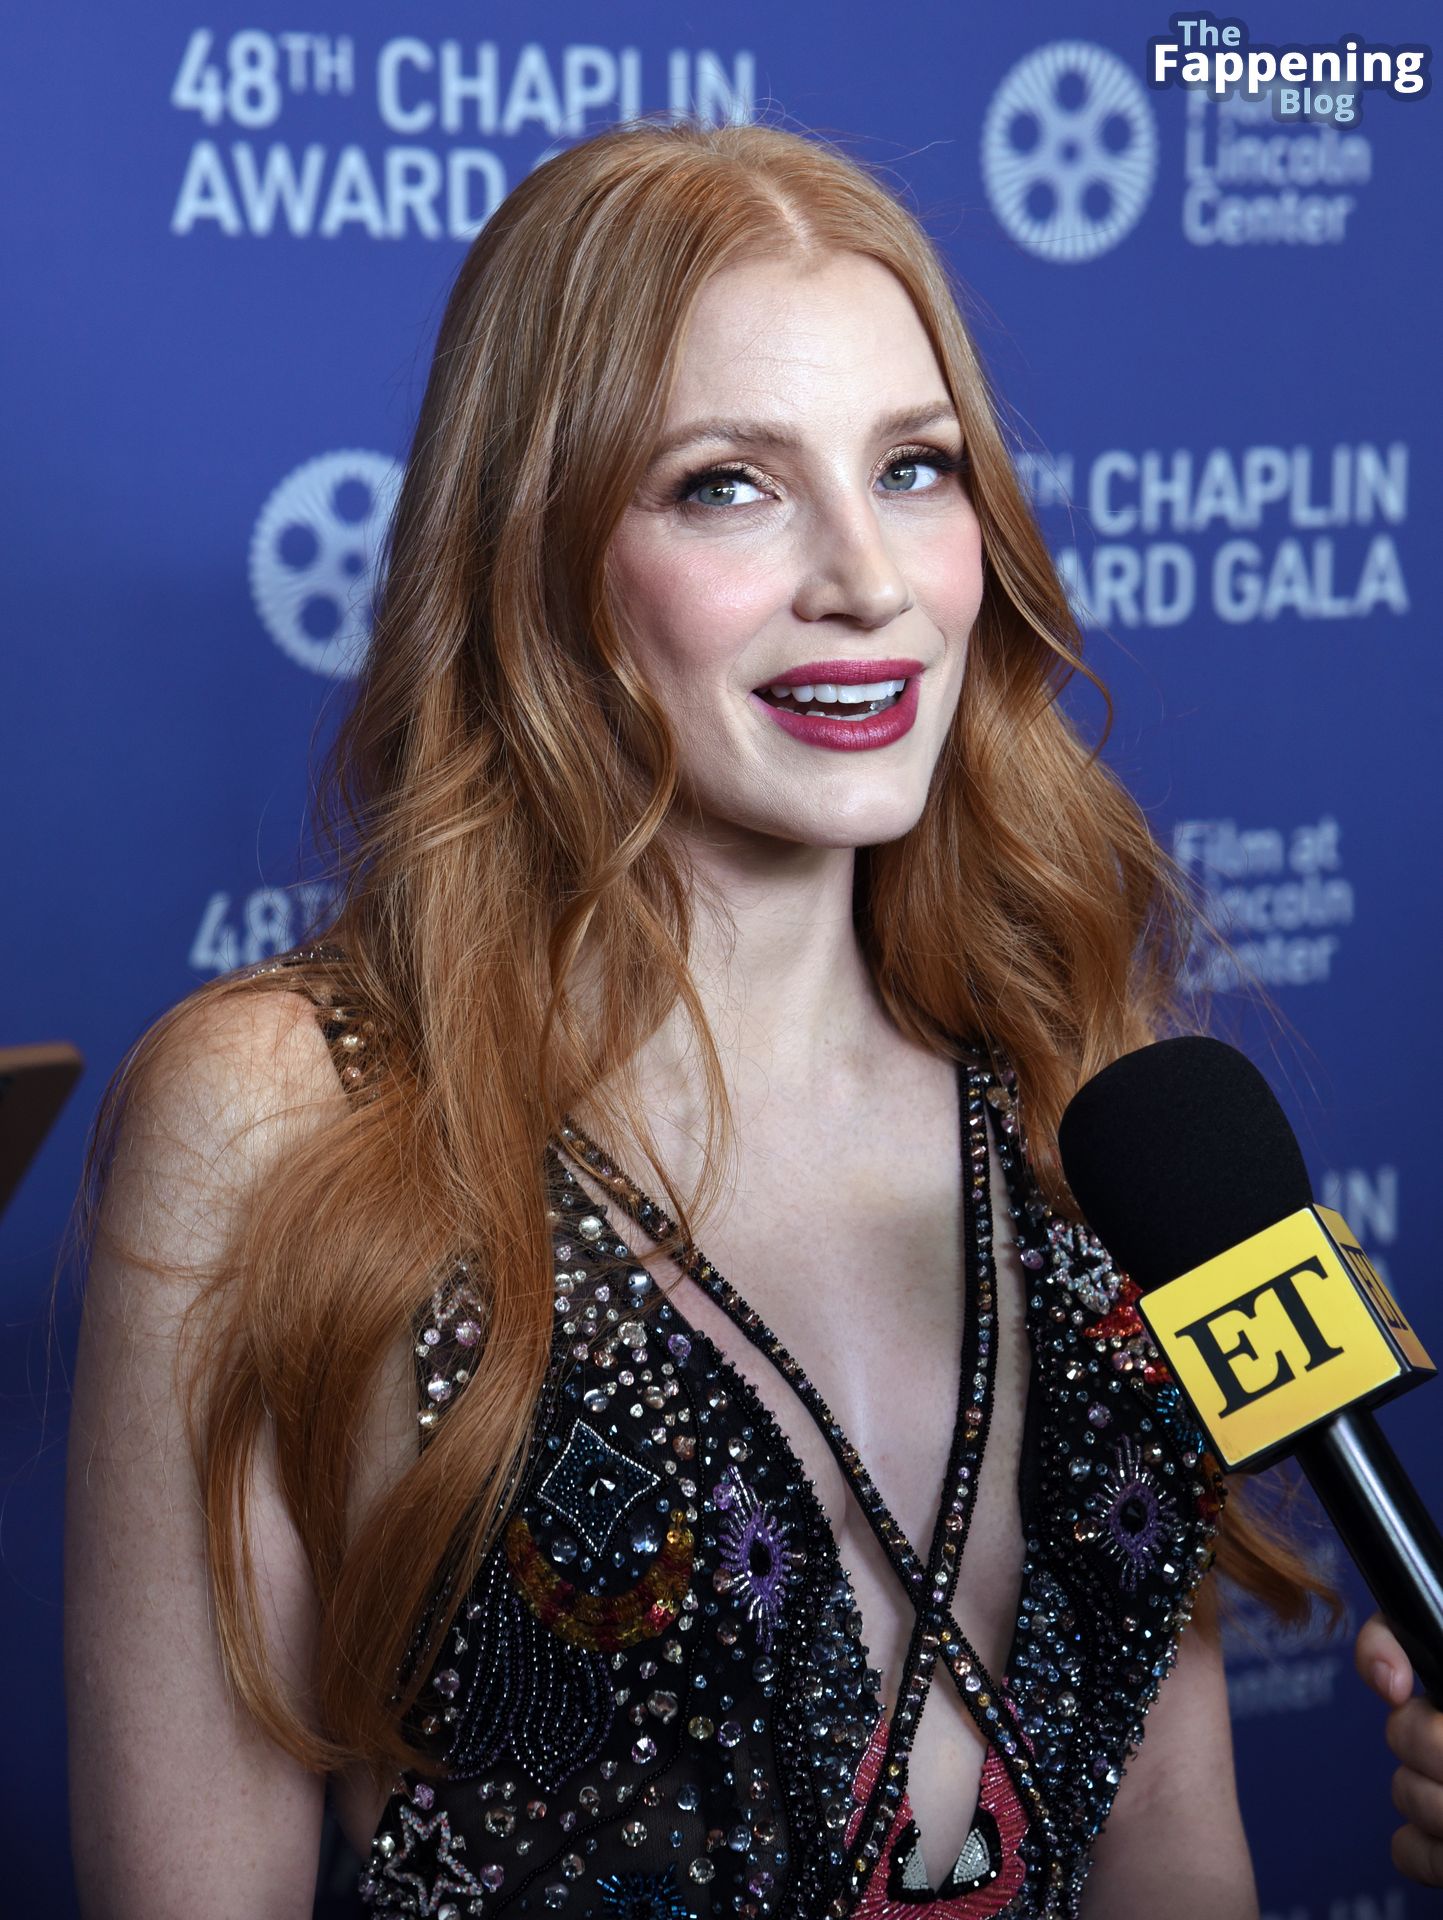 Jessica-Chastain-Sexy-The-Fappening-Blog-121.jpg